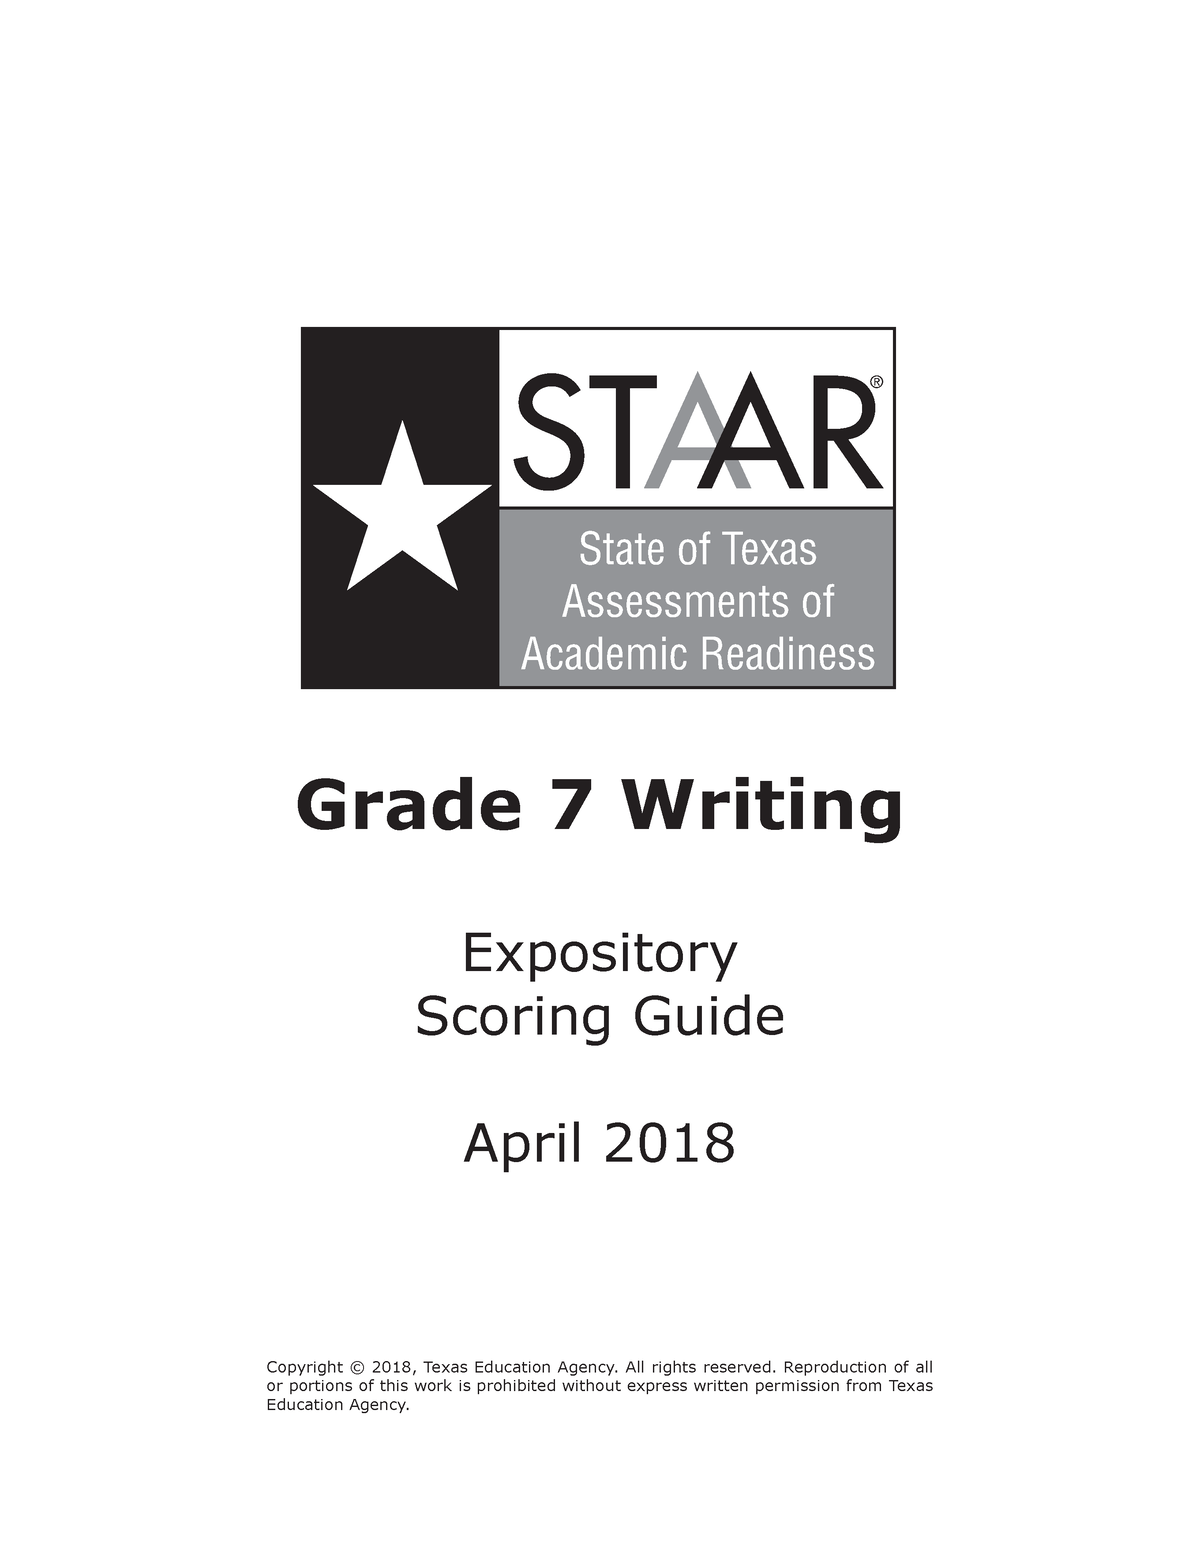 2018 Staar Gr7 Writing Scoring Guide State of Texas Assessments of